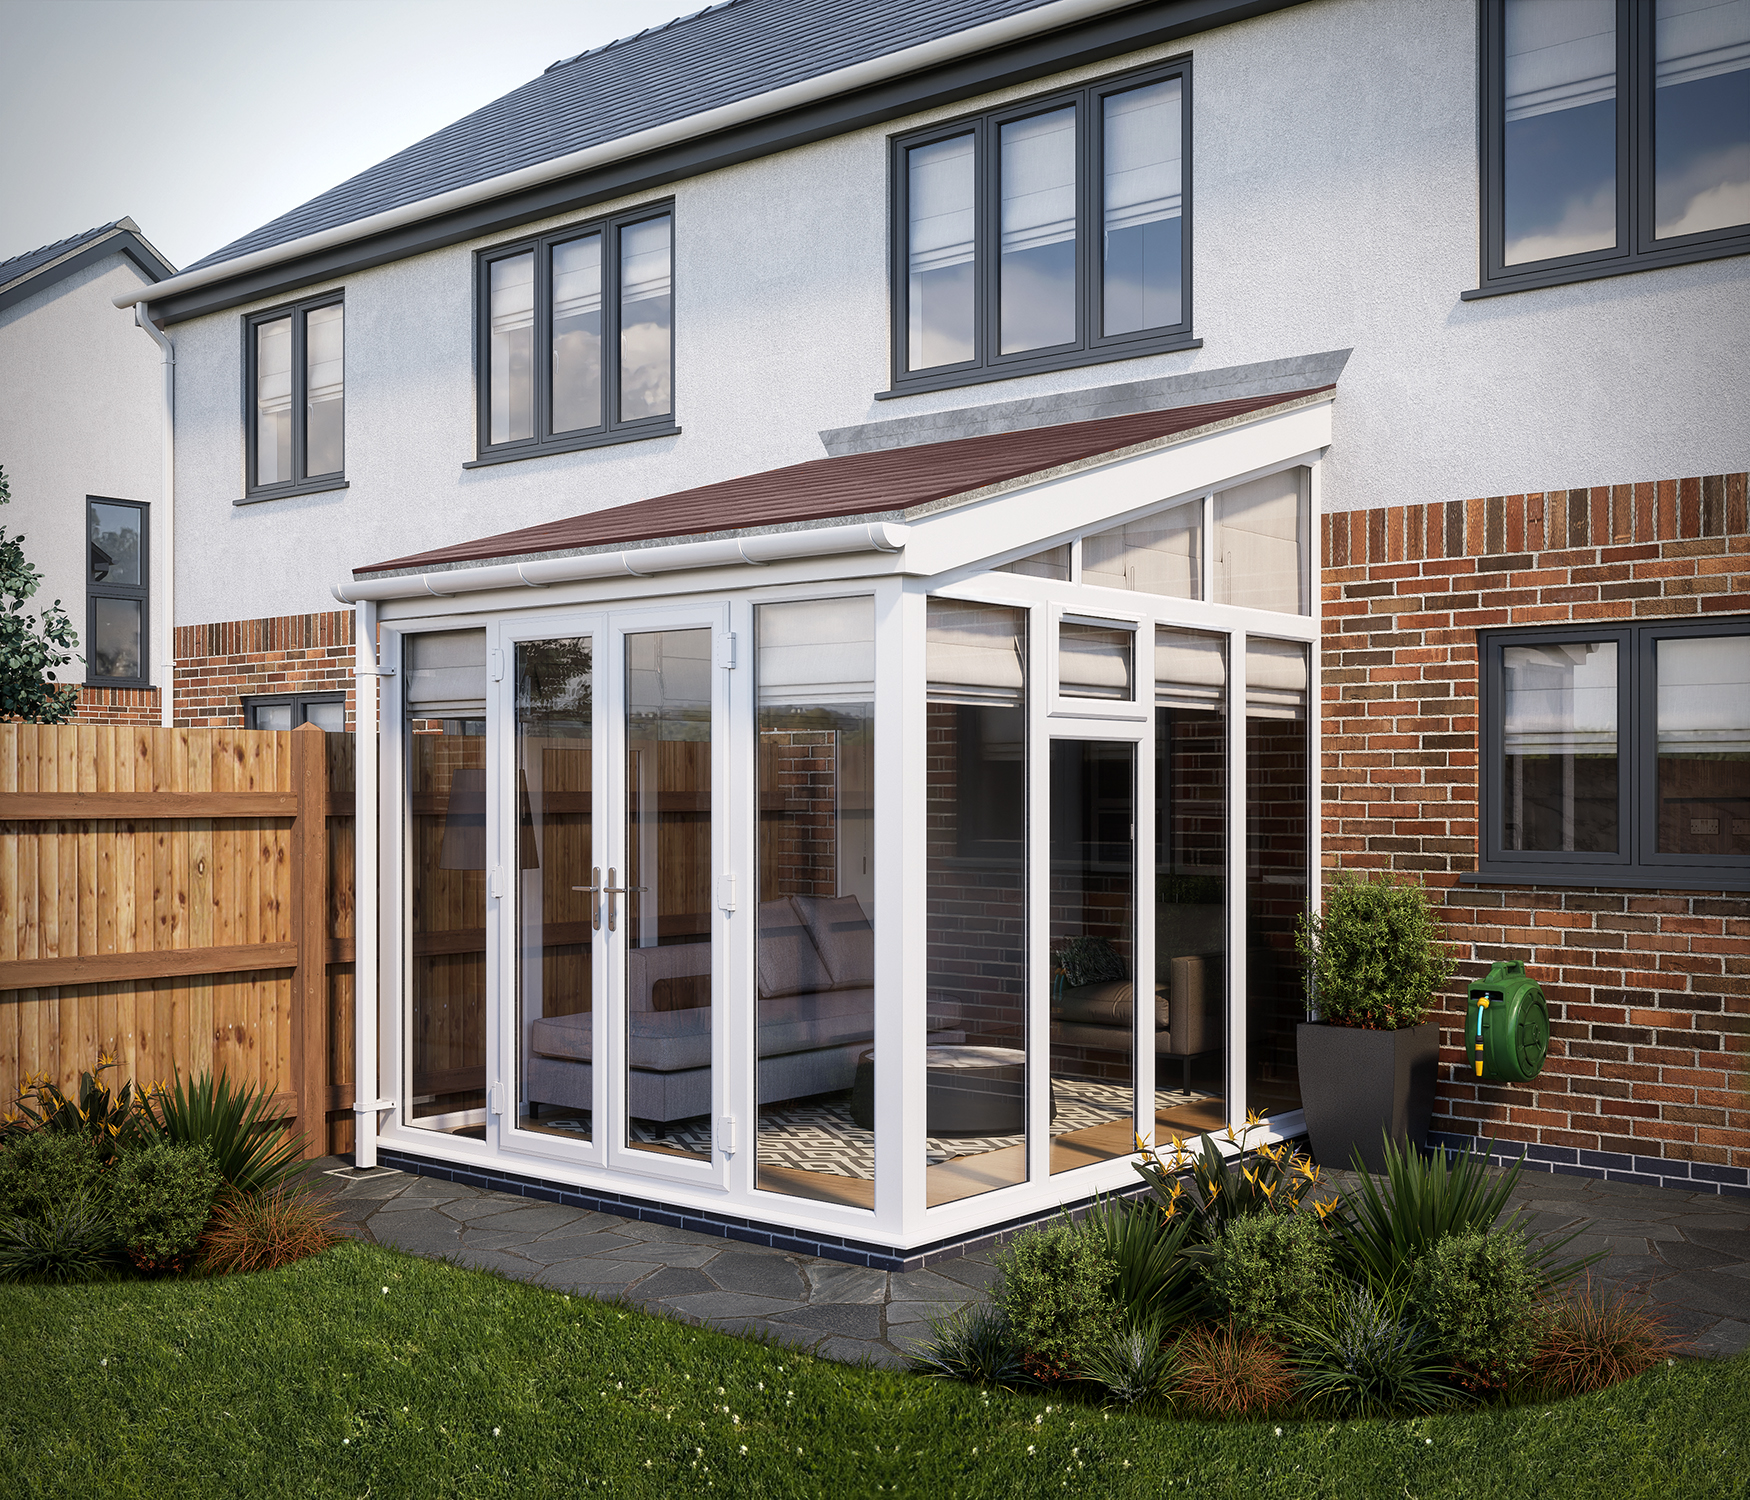 SOLid roof Full Height Lean to Conservatory White Frames with Rustic Brown Tiles